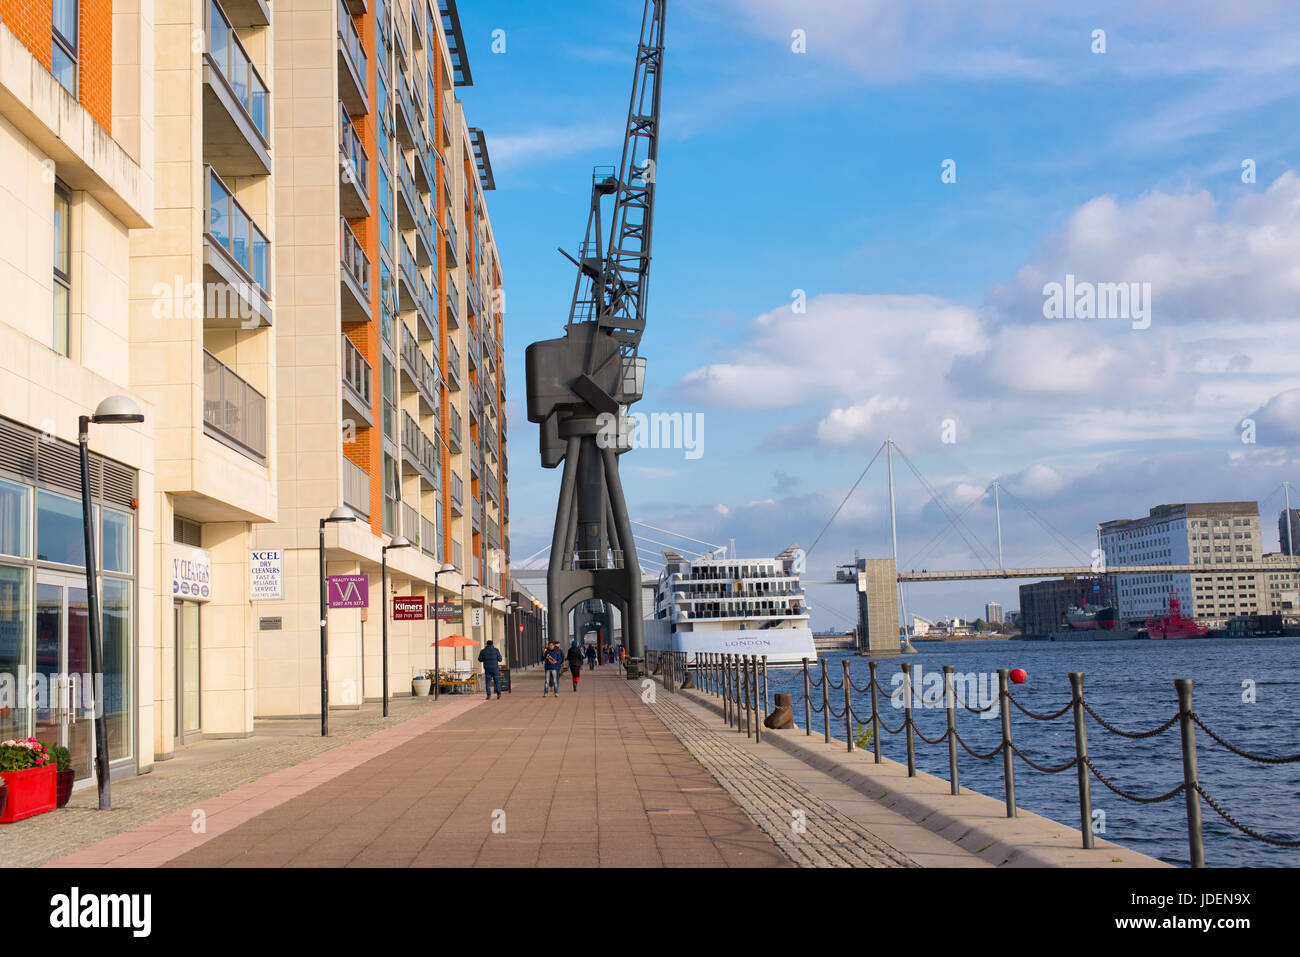 Riverside walk with big cranes and modern apartment buildings in Royal Victoria Dock, Excel Marina, Western Gateway, London, UK Stock Photo